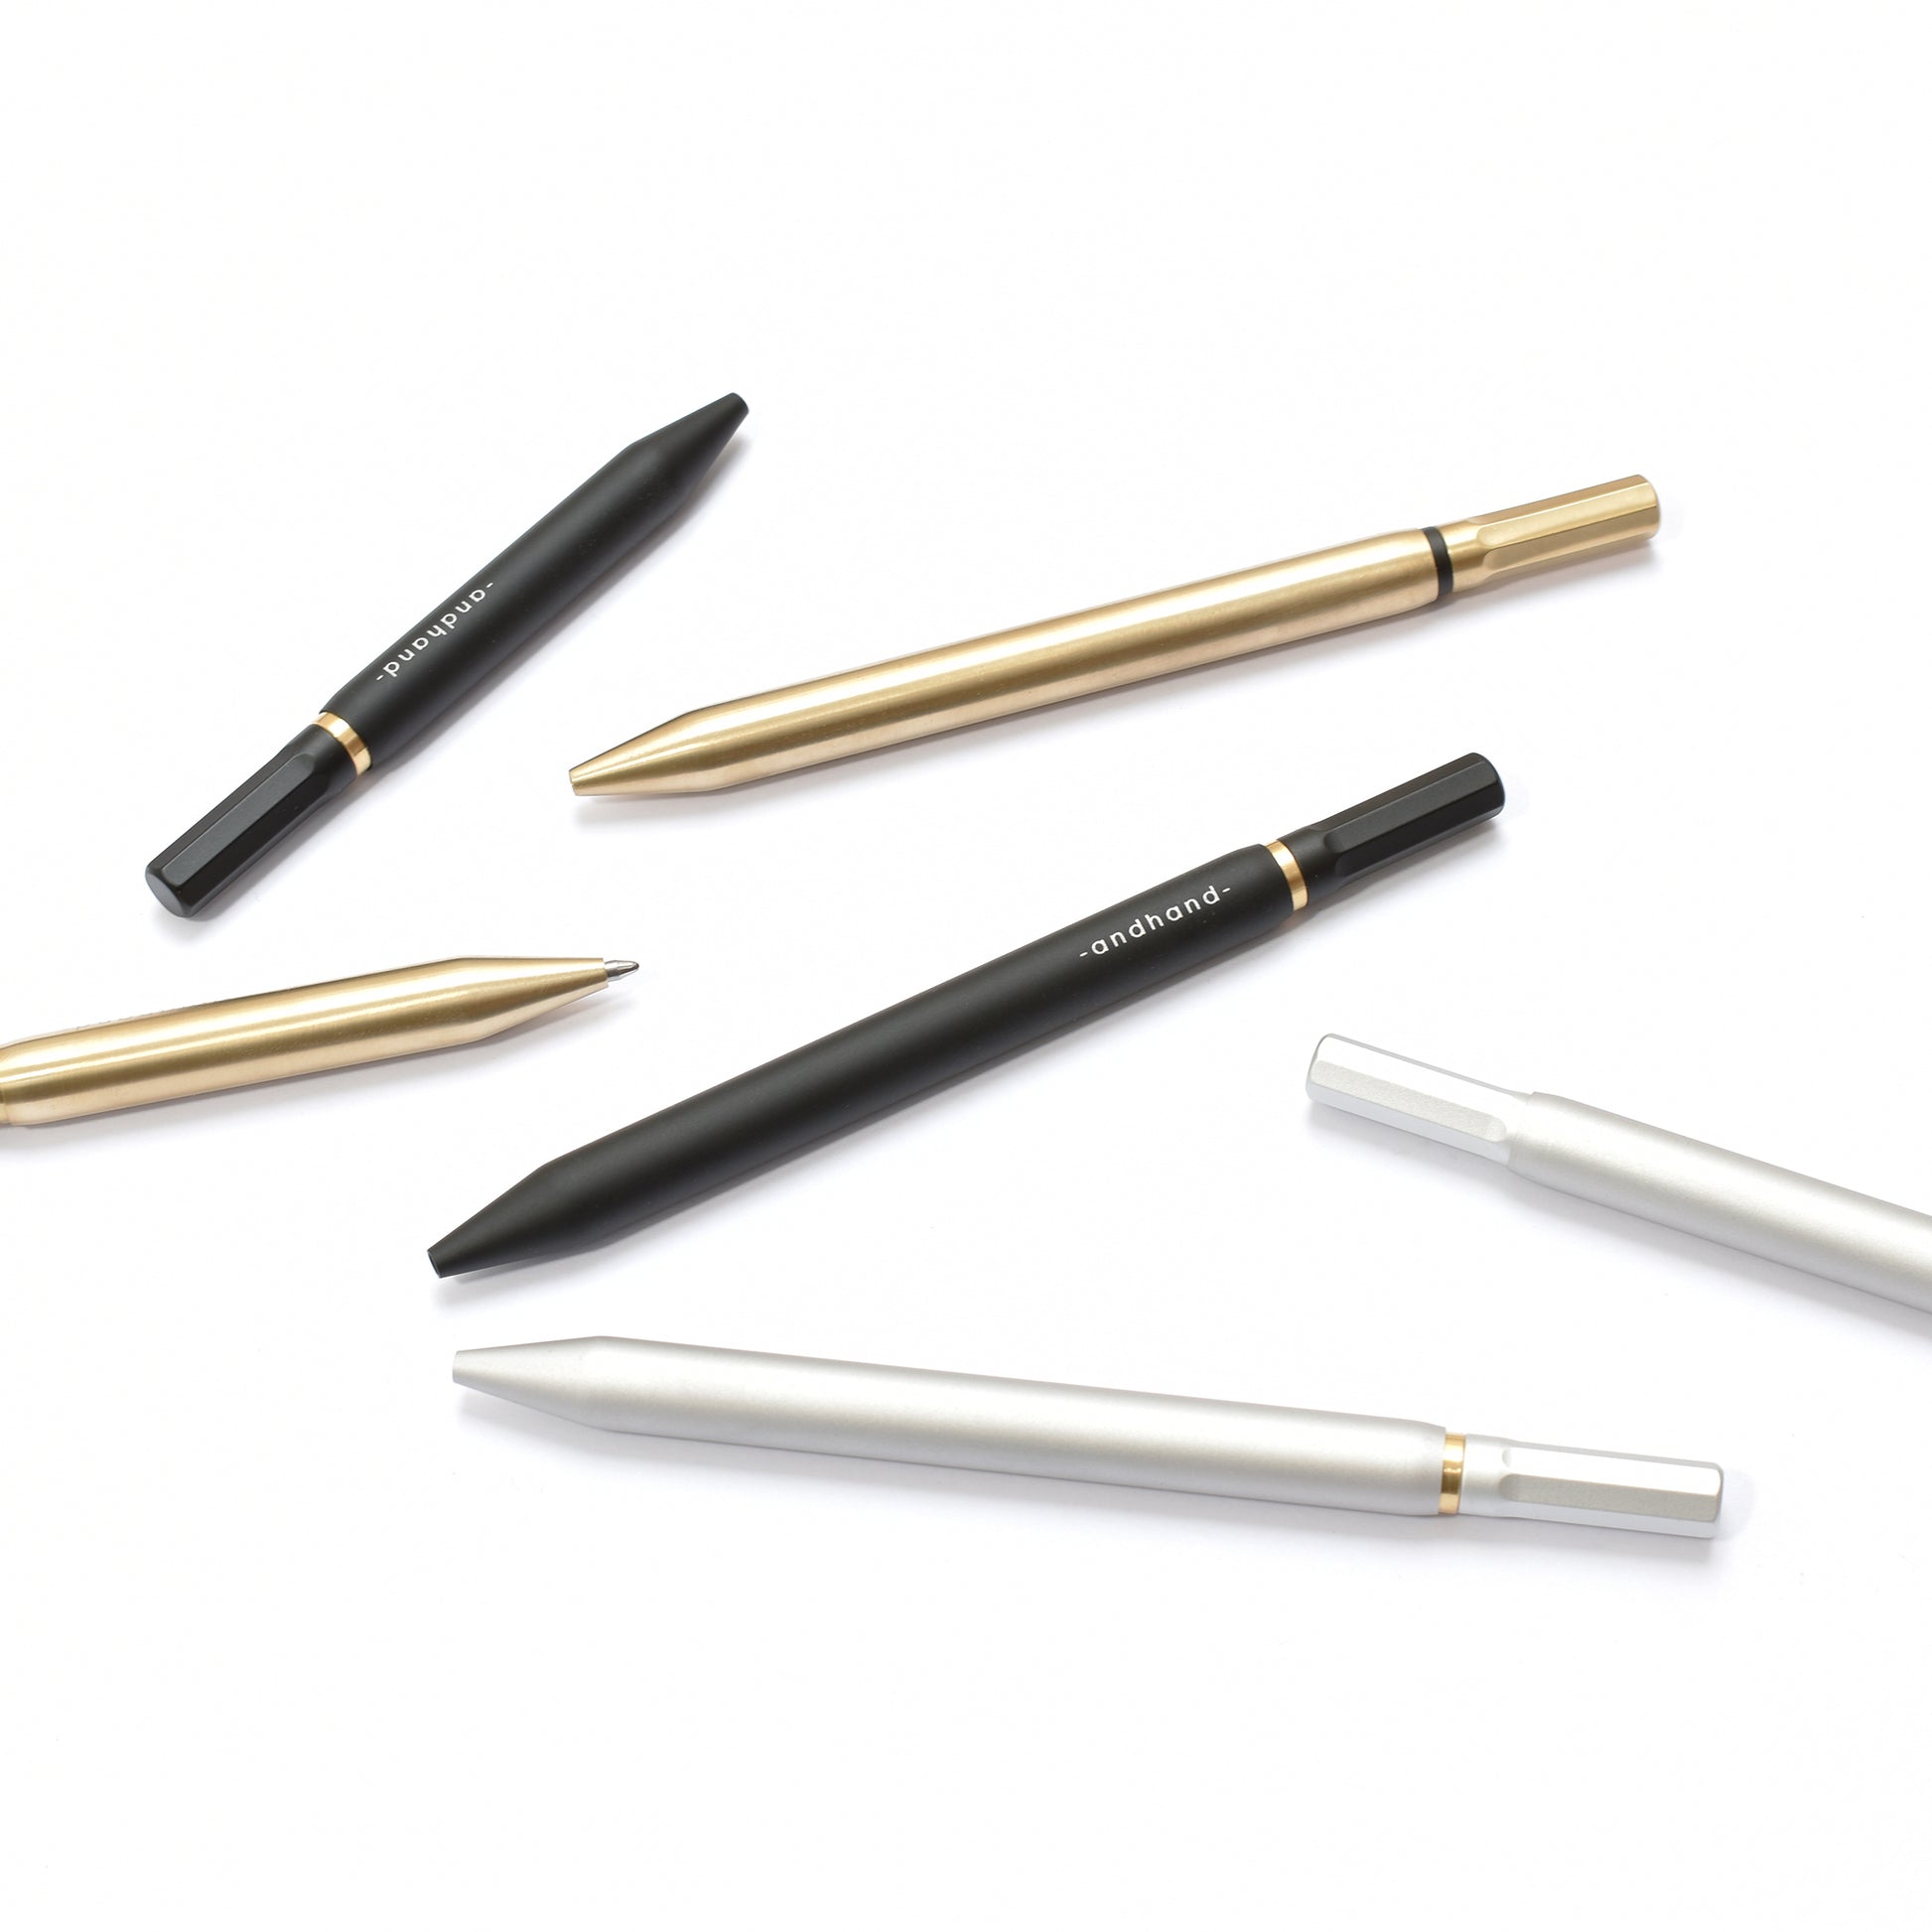 Aluminium and brass everyday carry ballpoint pen from Andhand. An expert compact writing tool with a smooth mechanism and modern minimal design. Amazingly durable and refined. Shown here in silver lustre anodized finish.